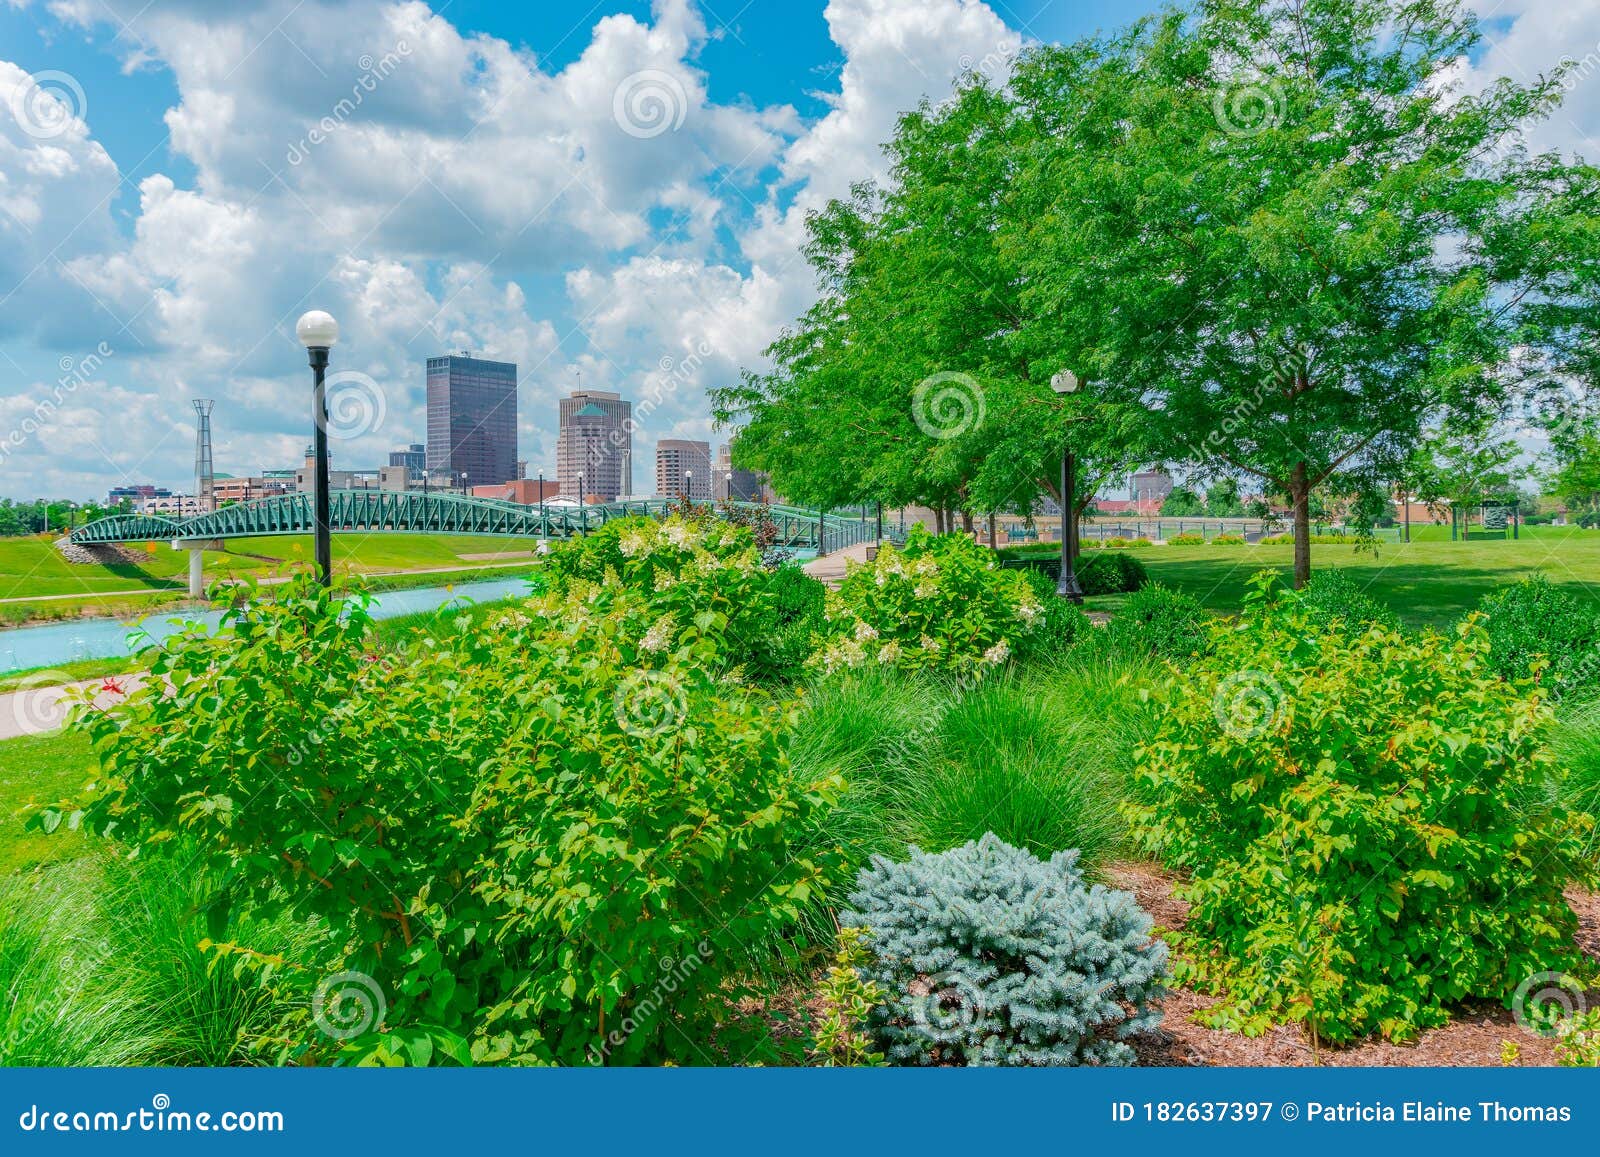 the river scape park area of dayton, ohio and the great miami river